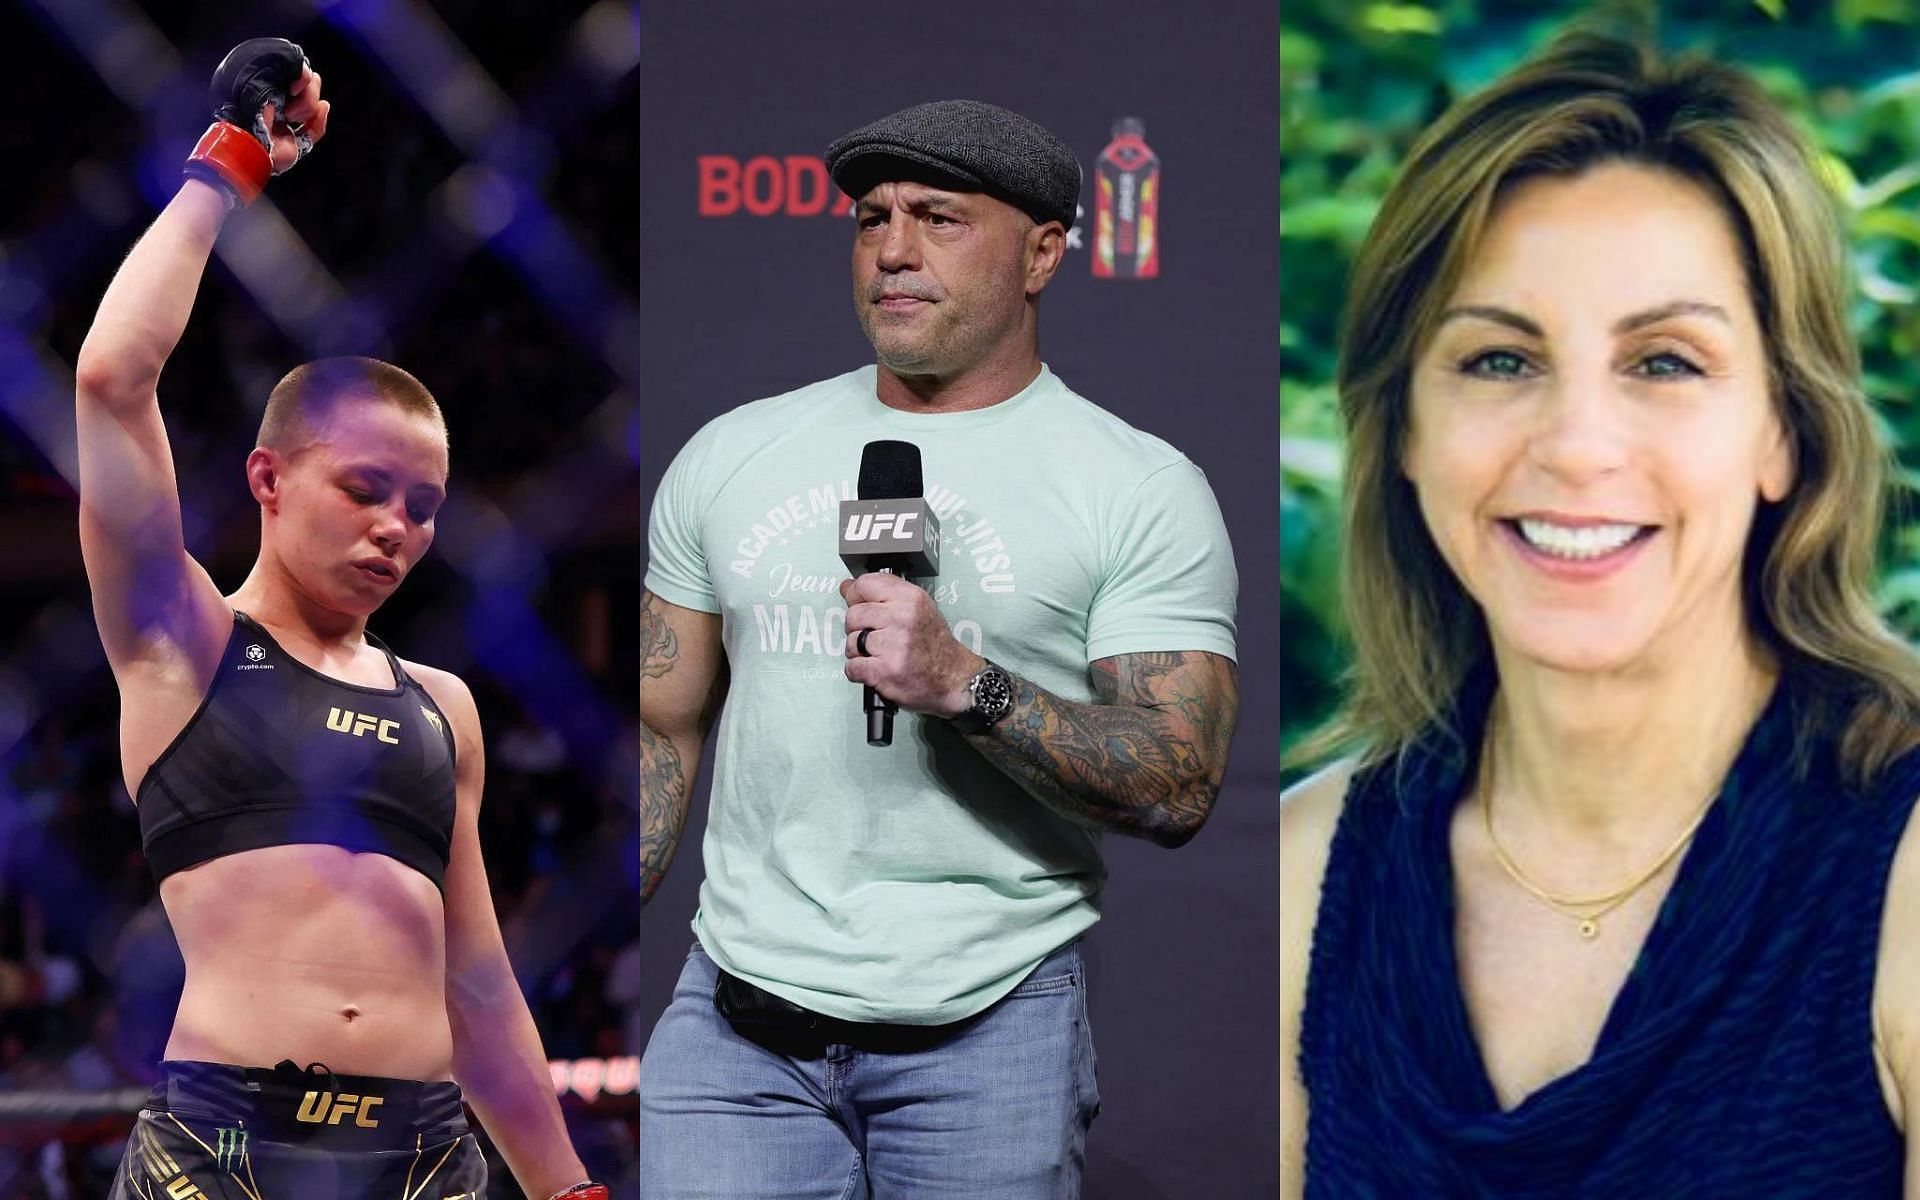 Rose Namajunas (left), Joe Rogan (center), and Carole Hooven (right) [Images courtesy of Getty and @hoovlet Twitter]